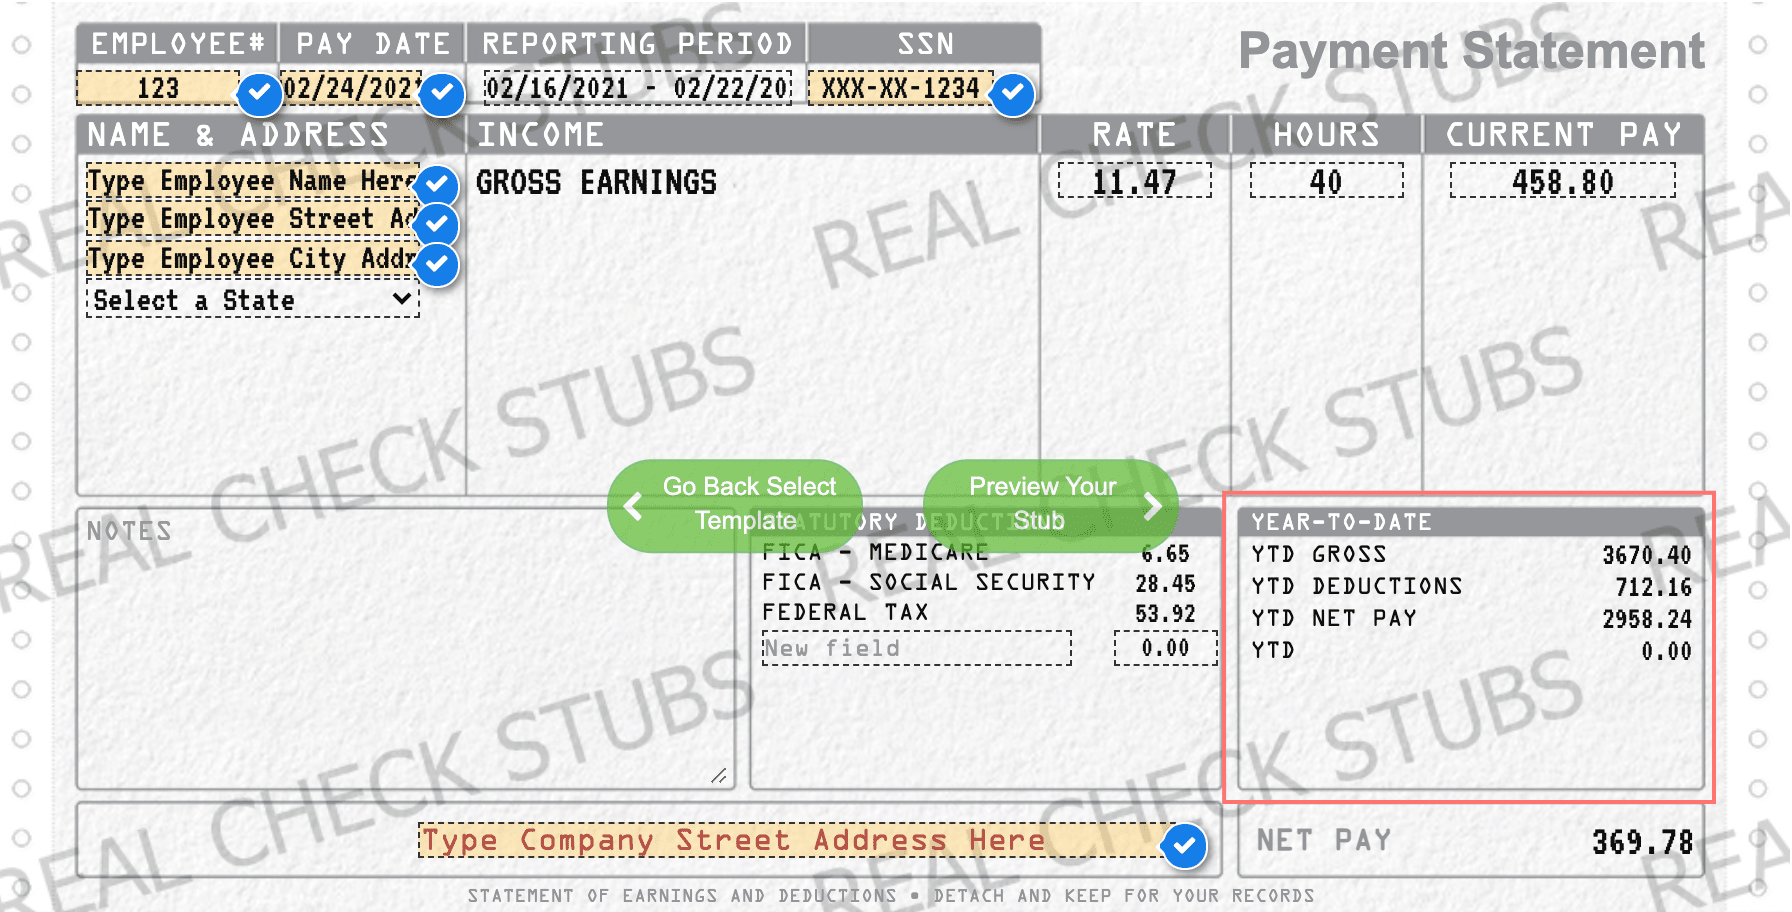 What Is a Year-To-Date Pay Stub?